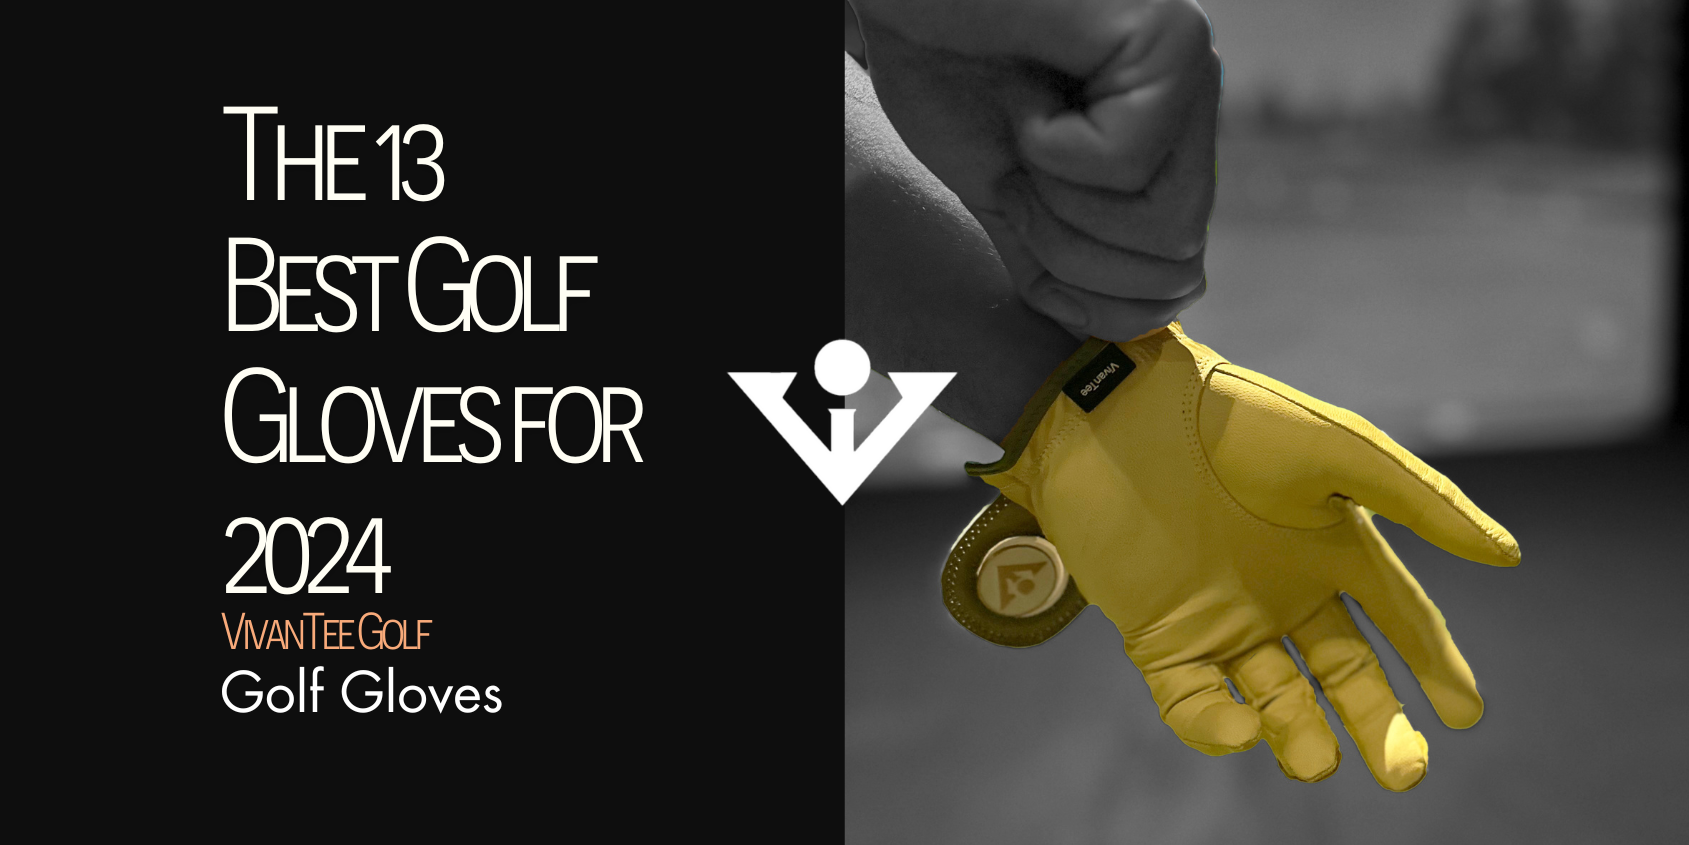 A yellow golf glove being put on with a black and white background showcasing the vibrant colors, in our signature blog banner for best golf gloves in 2024.